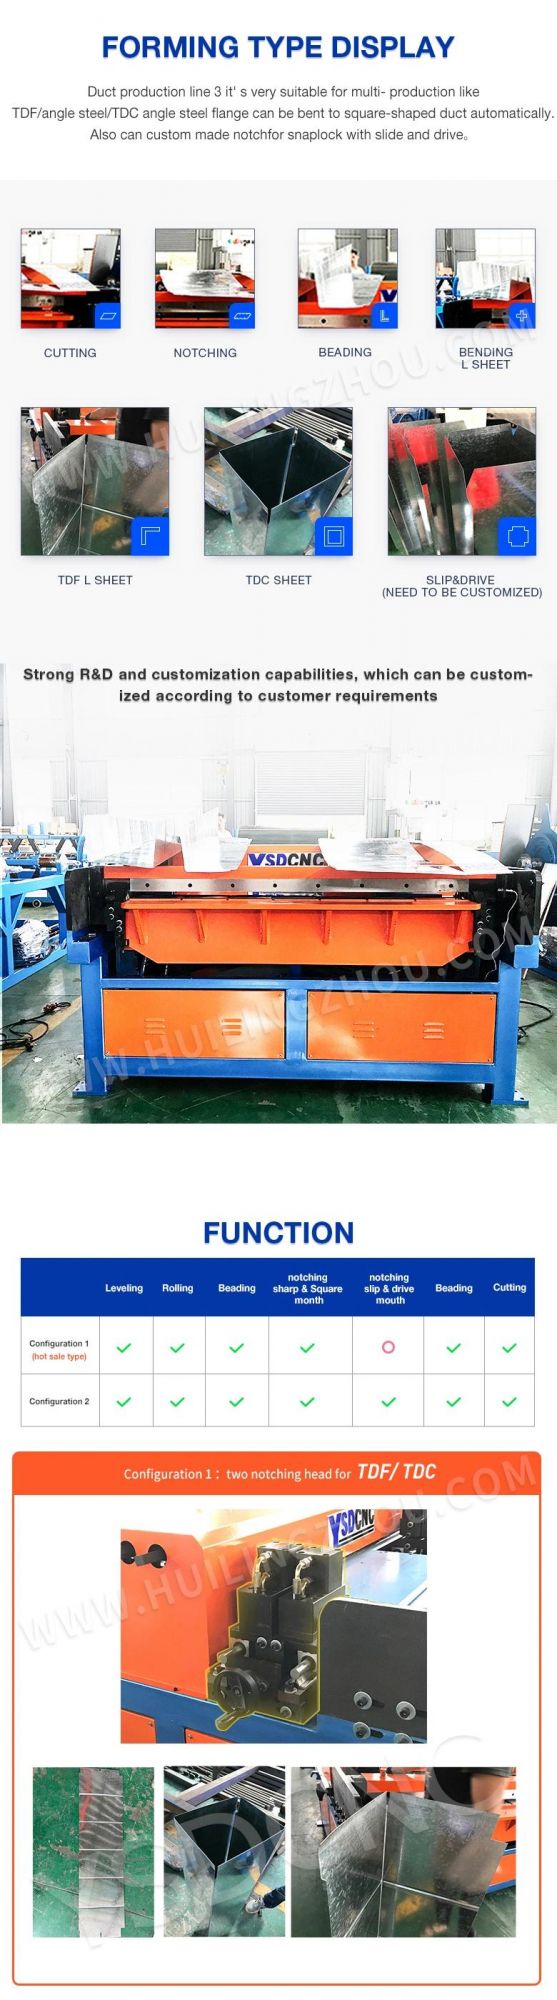 HVAC Ductwork Machines / Auto Duct Line 3 /Duct Fabrication Machine Line 2